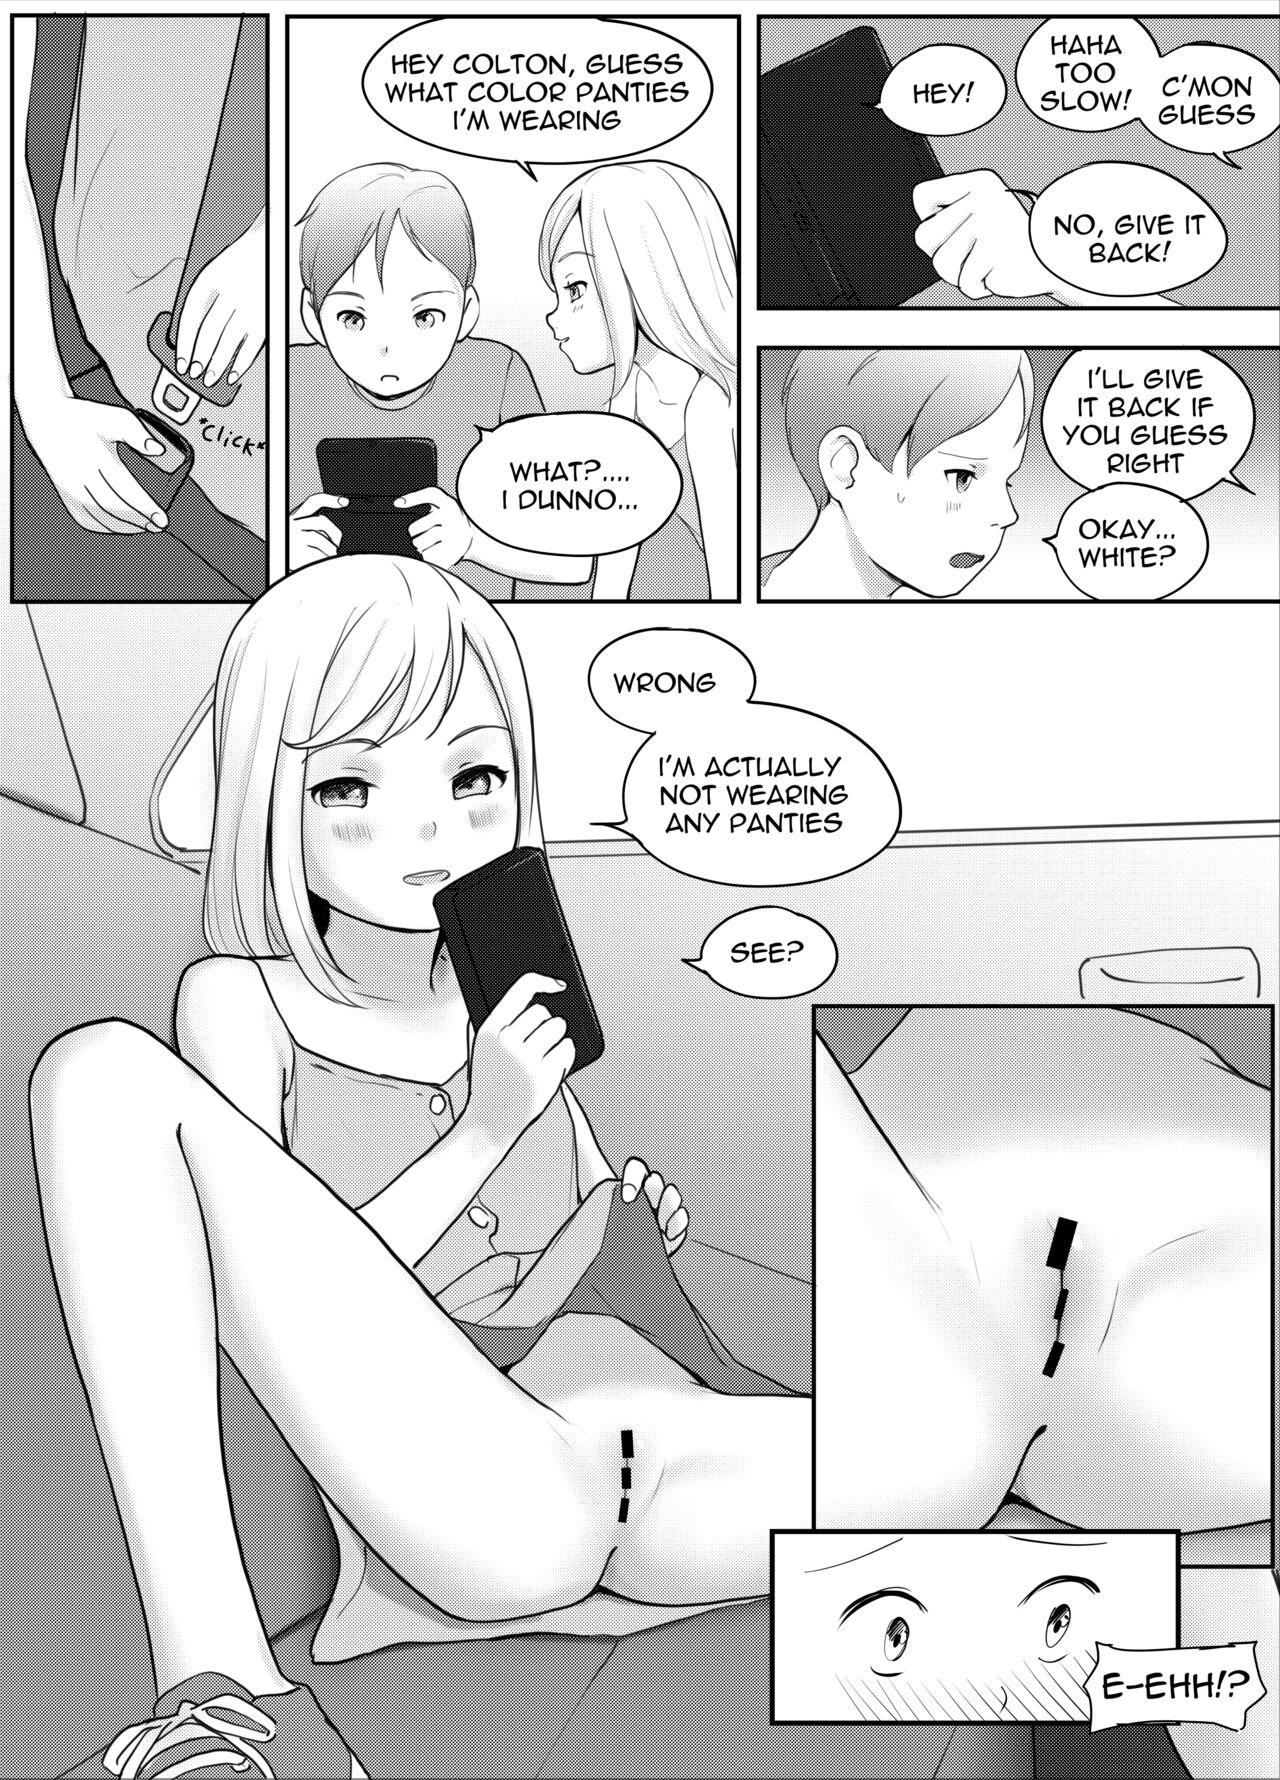 Blowjob Passing the Time - Original Fucking - Page 4